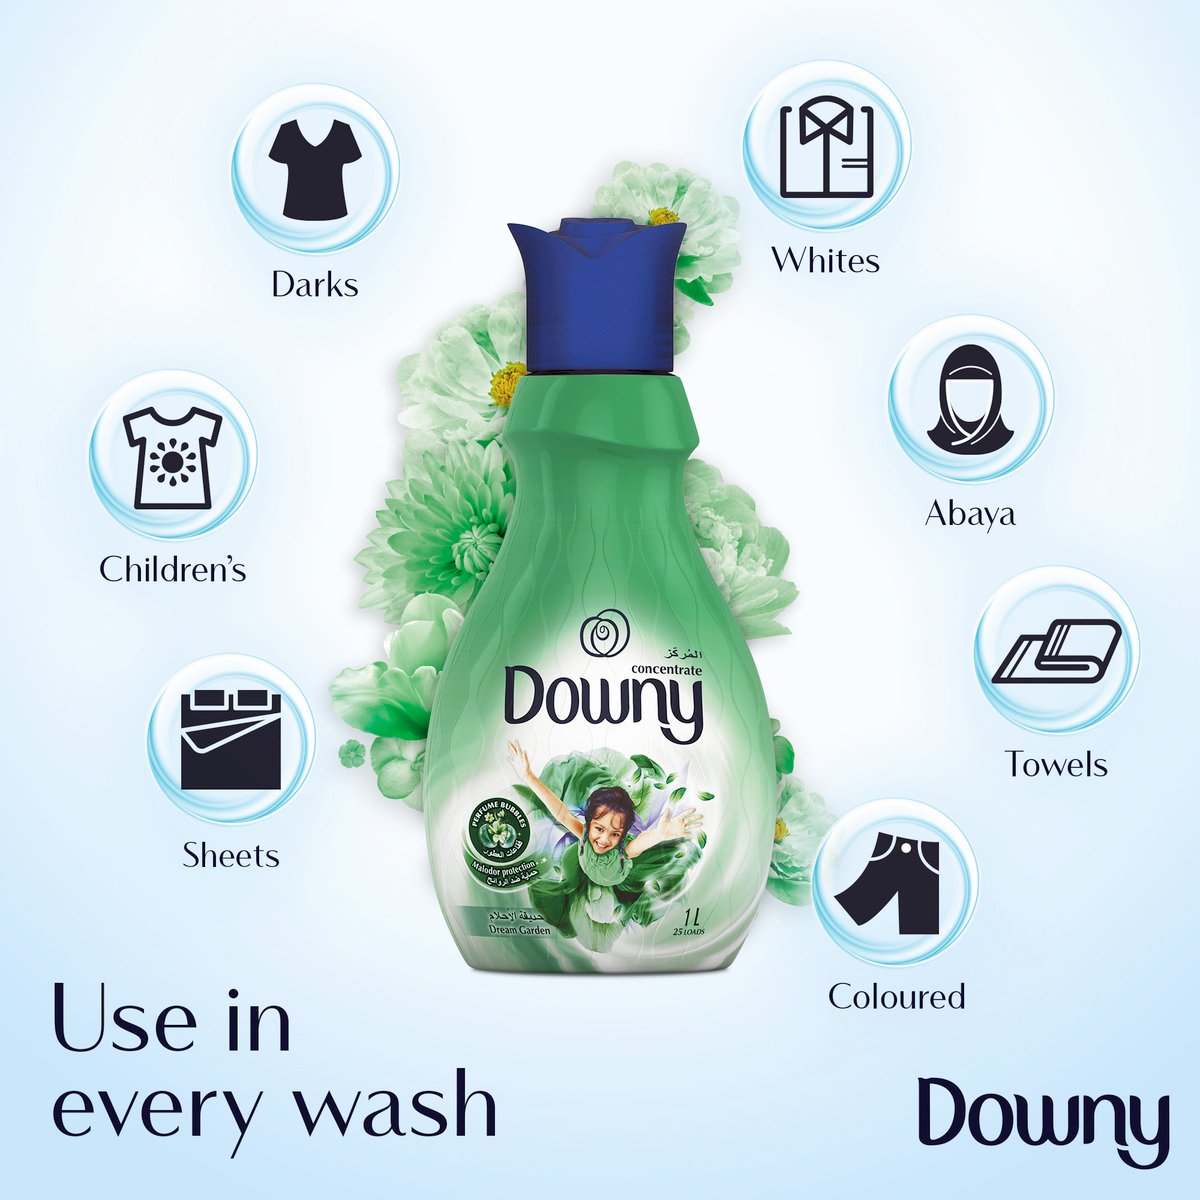 Downy  Fabric Softener Concentrate Dream Garden 3 x 1.5Litre